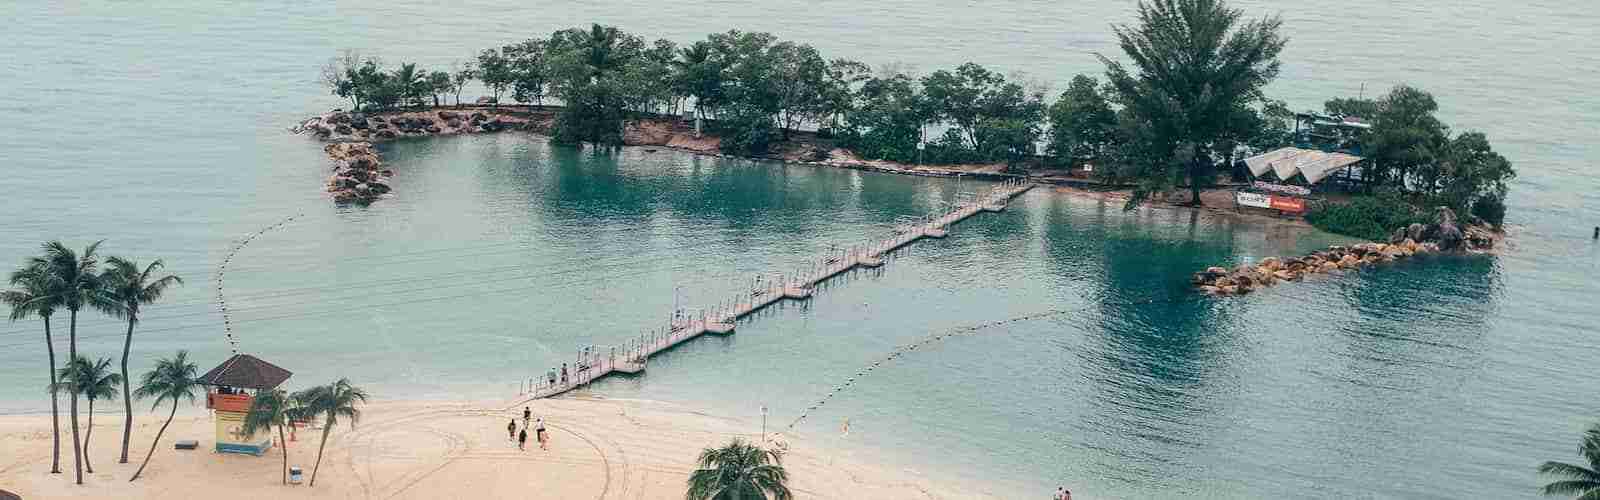 Best Beaches In Singapore You Should Visit